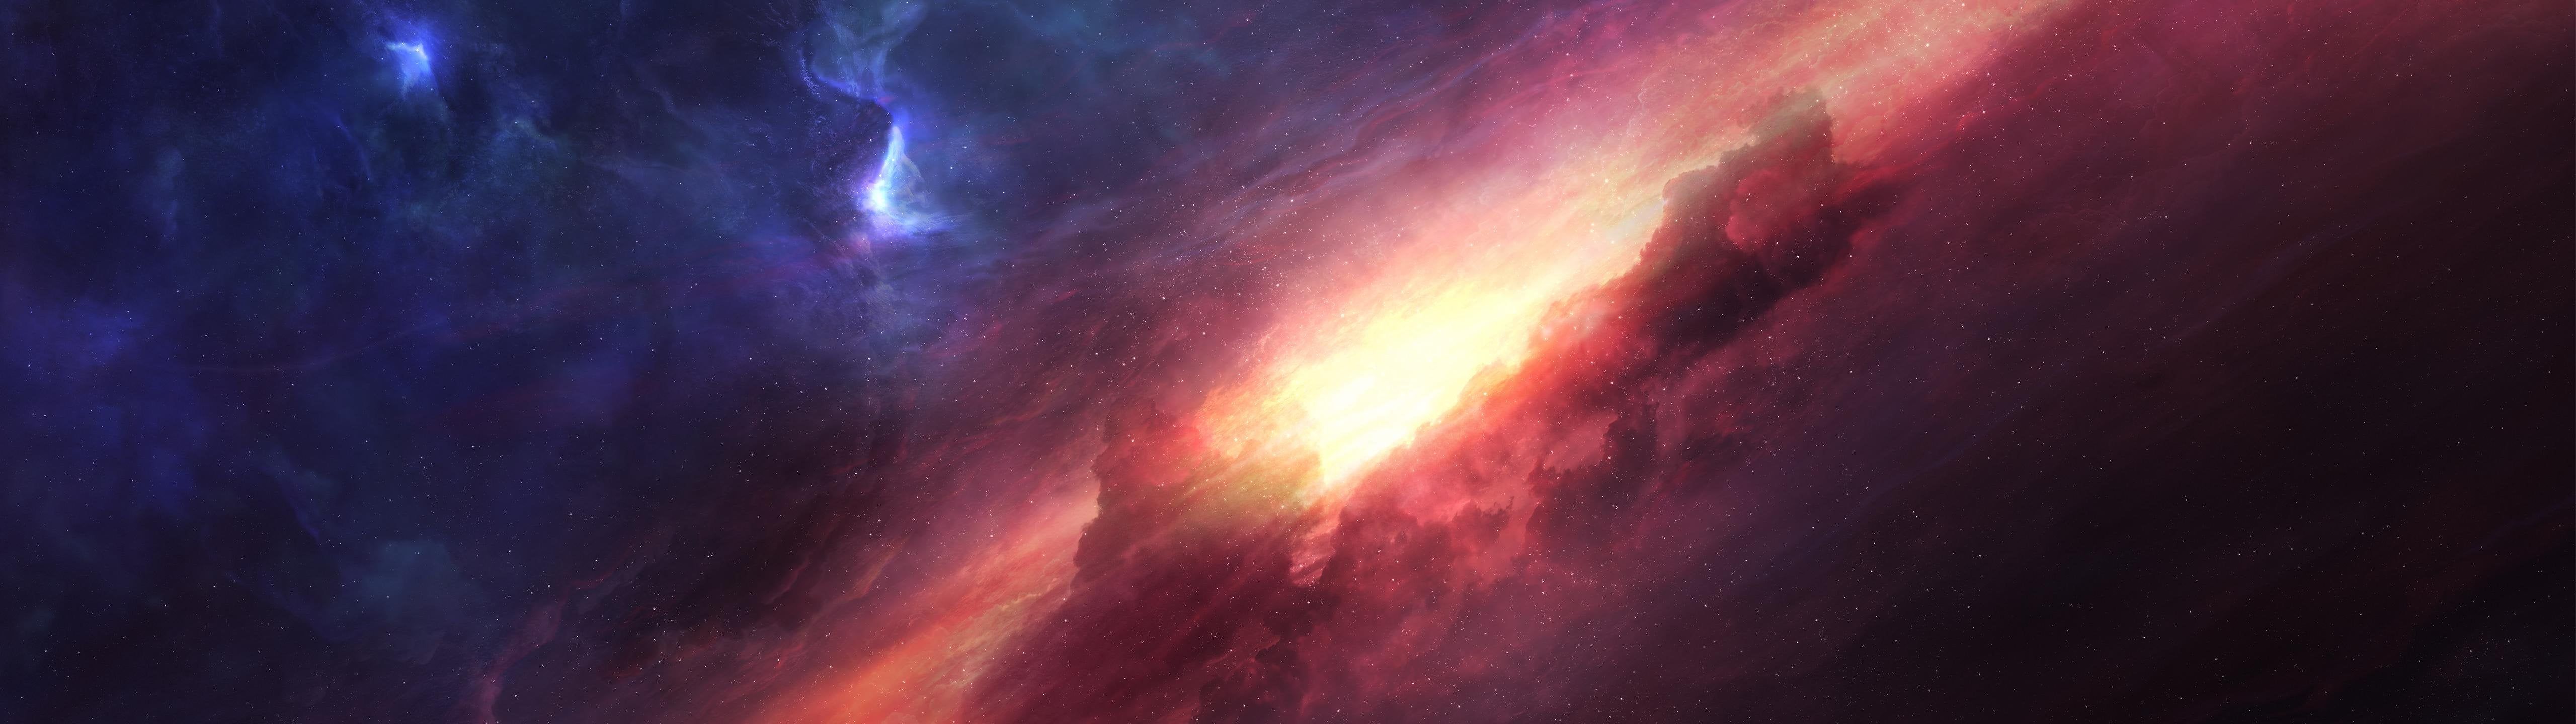 5120x1440] Space nebula cropped from 5K Pics : multiwall